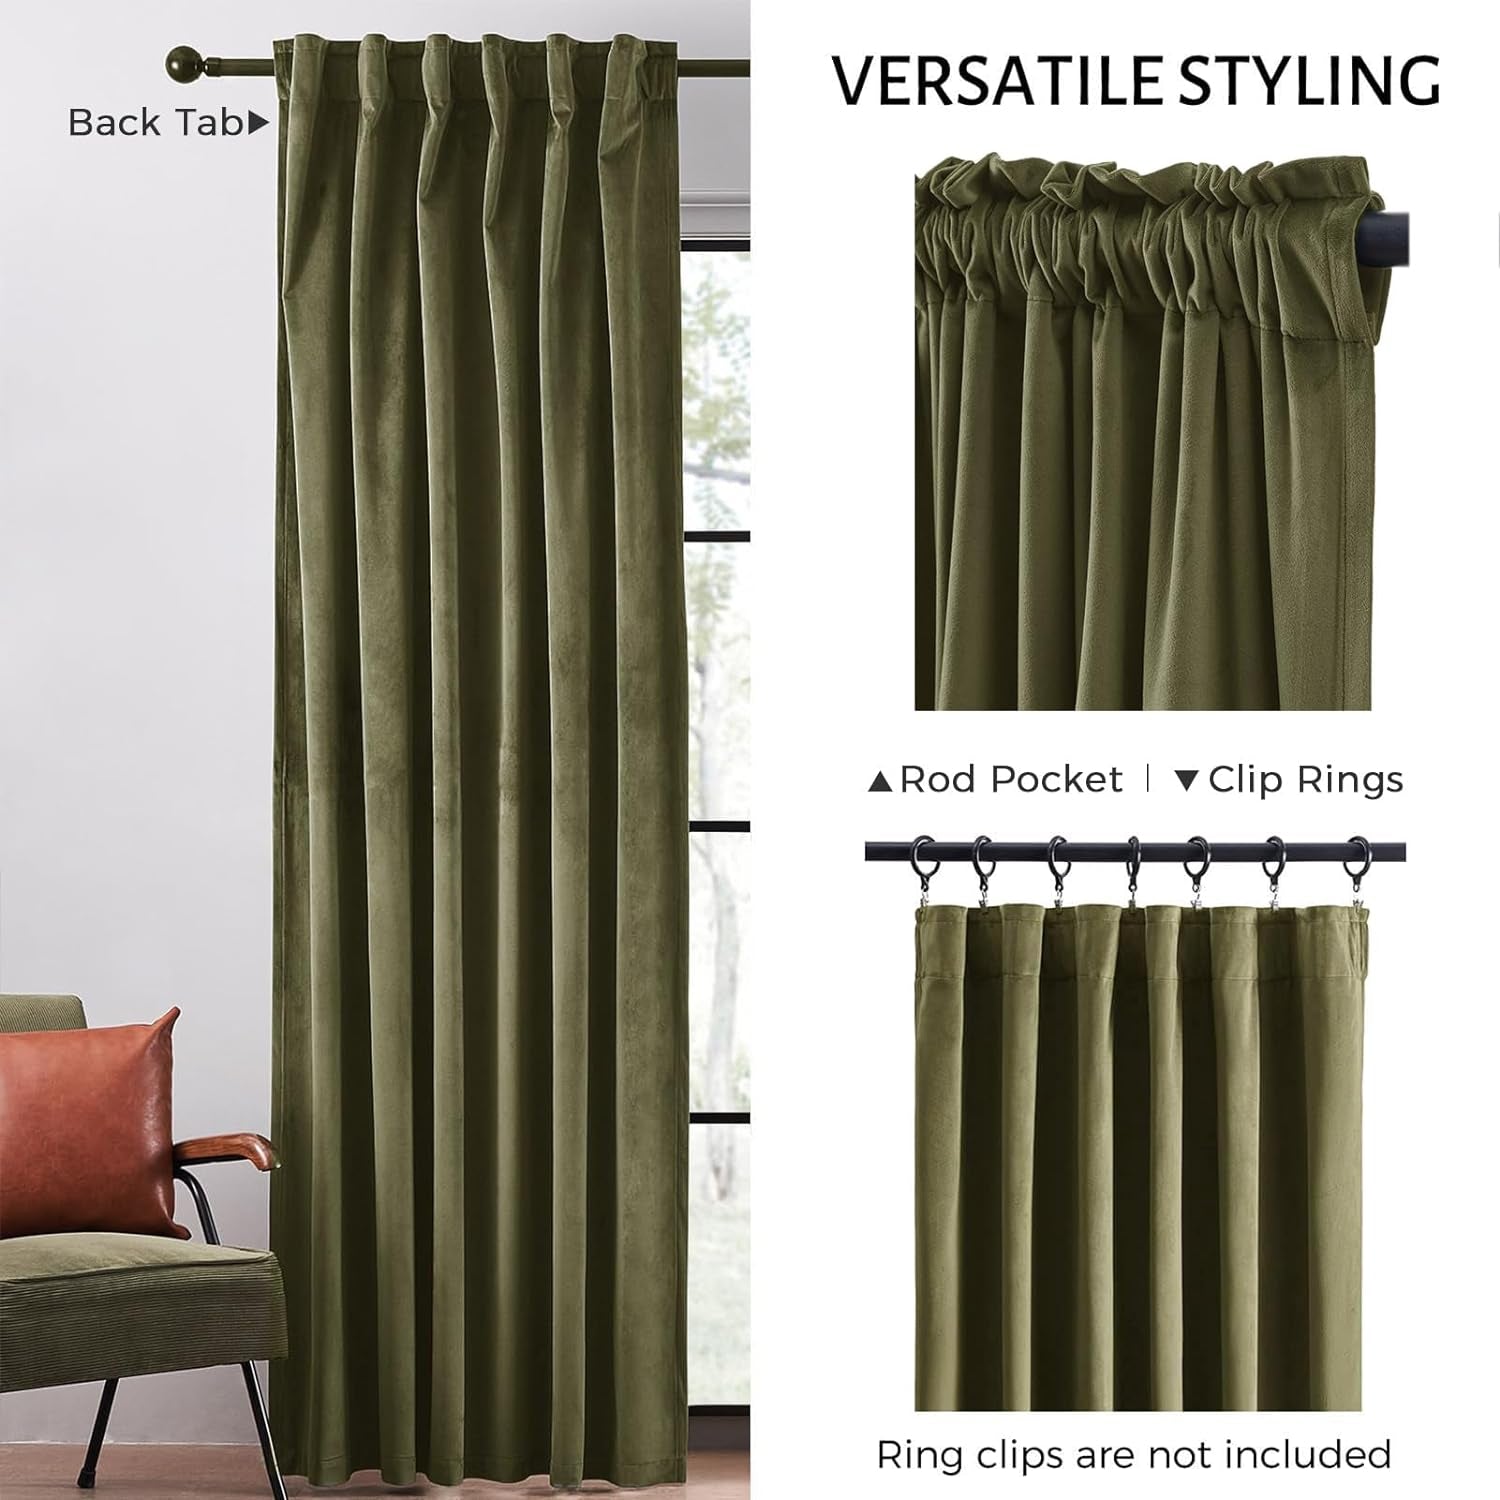 Topfinel Olive Green Velvet Curtains 84 Inches Long for Living Room,Blackout Thermal Insulated Curtains for Bedroom,Back Tab Modern Window Treatment for Living Room,52X84 Inch Length,Olive Green  Top Fine   